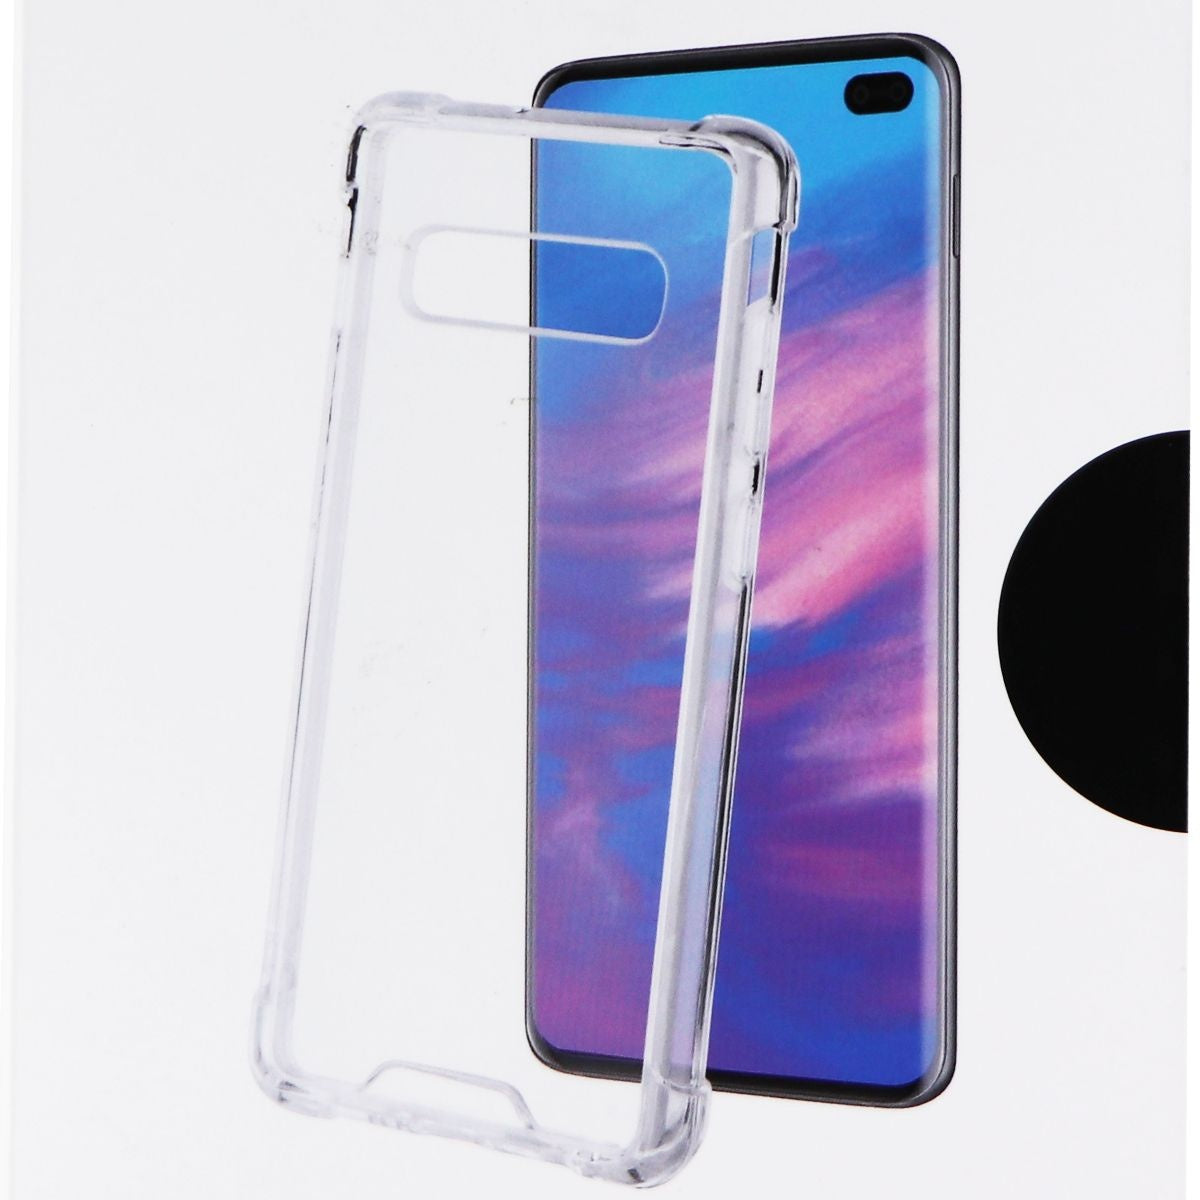 Key Hybrid Hard Case for Samsung Galaxy (S10+) Smartphones - Clear Cases, Covers & Skins Key    - Simple Cell Bulk Wholesale Pricing - USA Seller